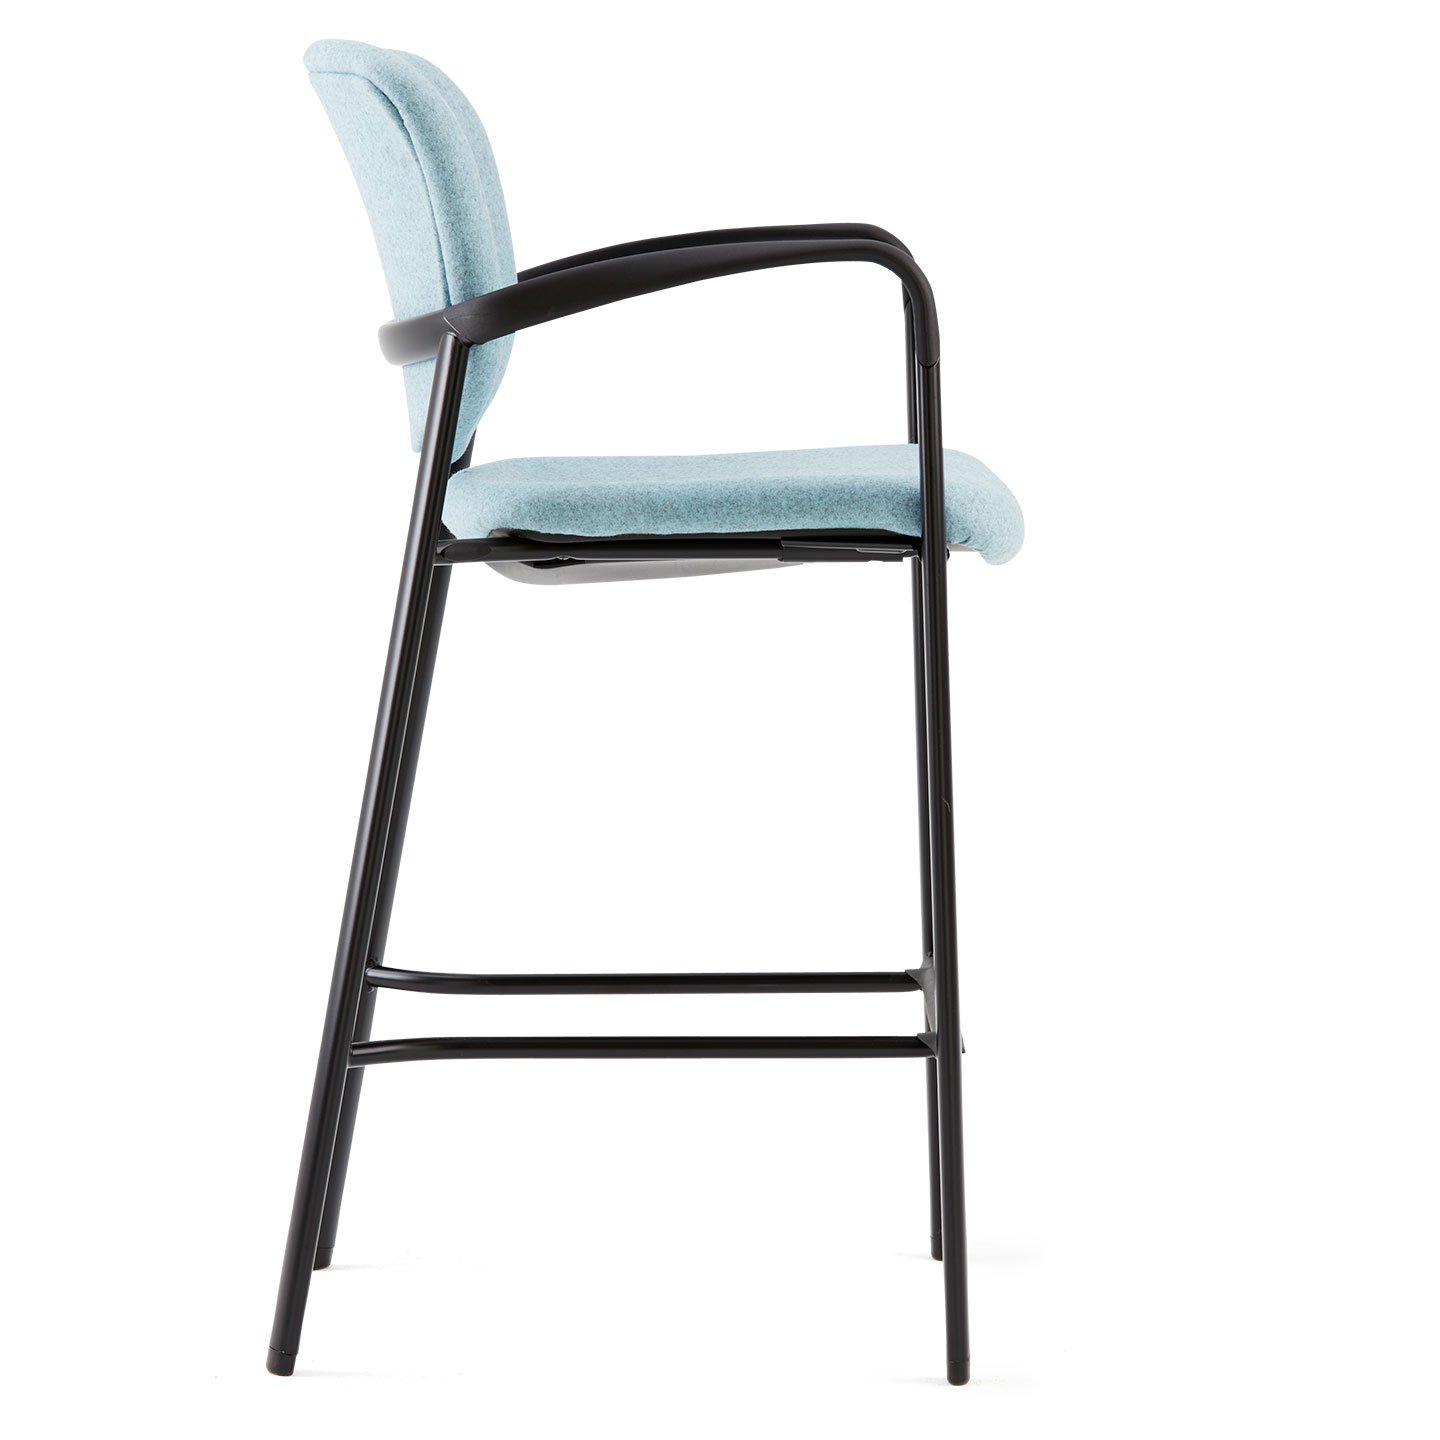 Haworth Improv side stool in blue upholstery in a side view